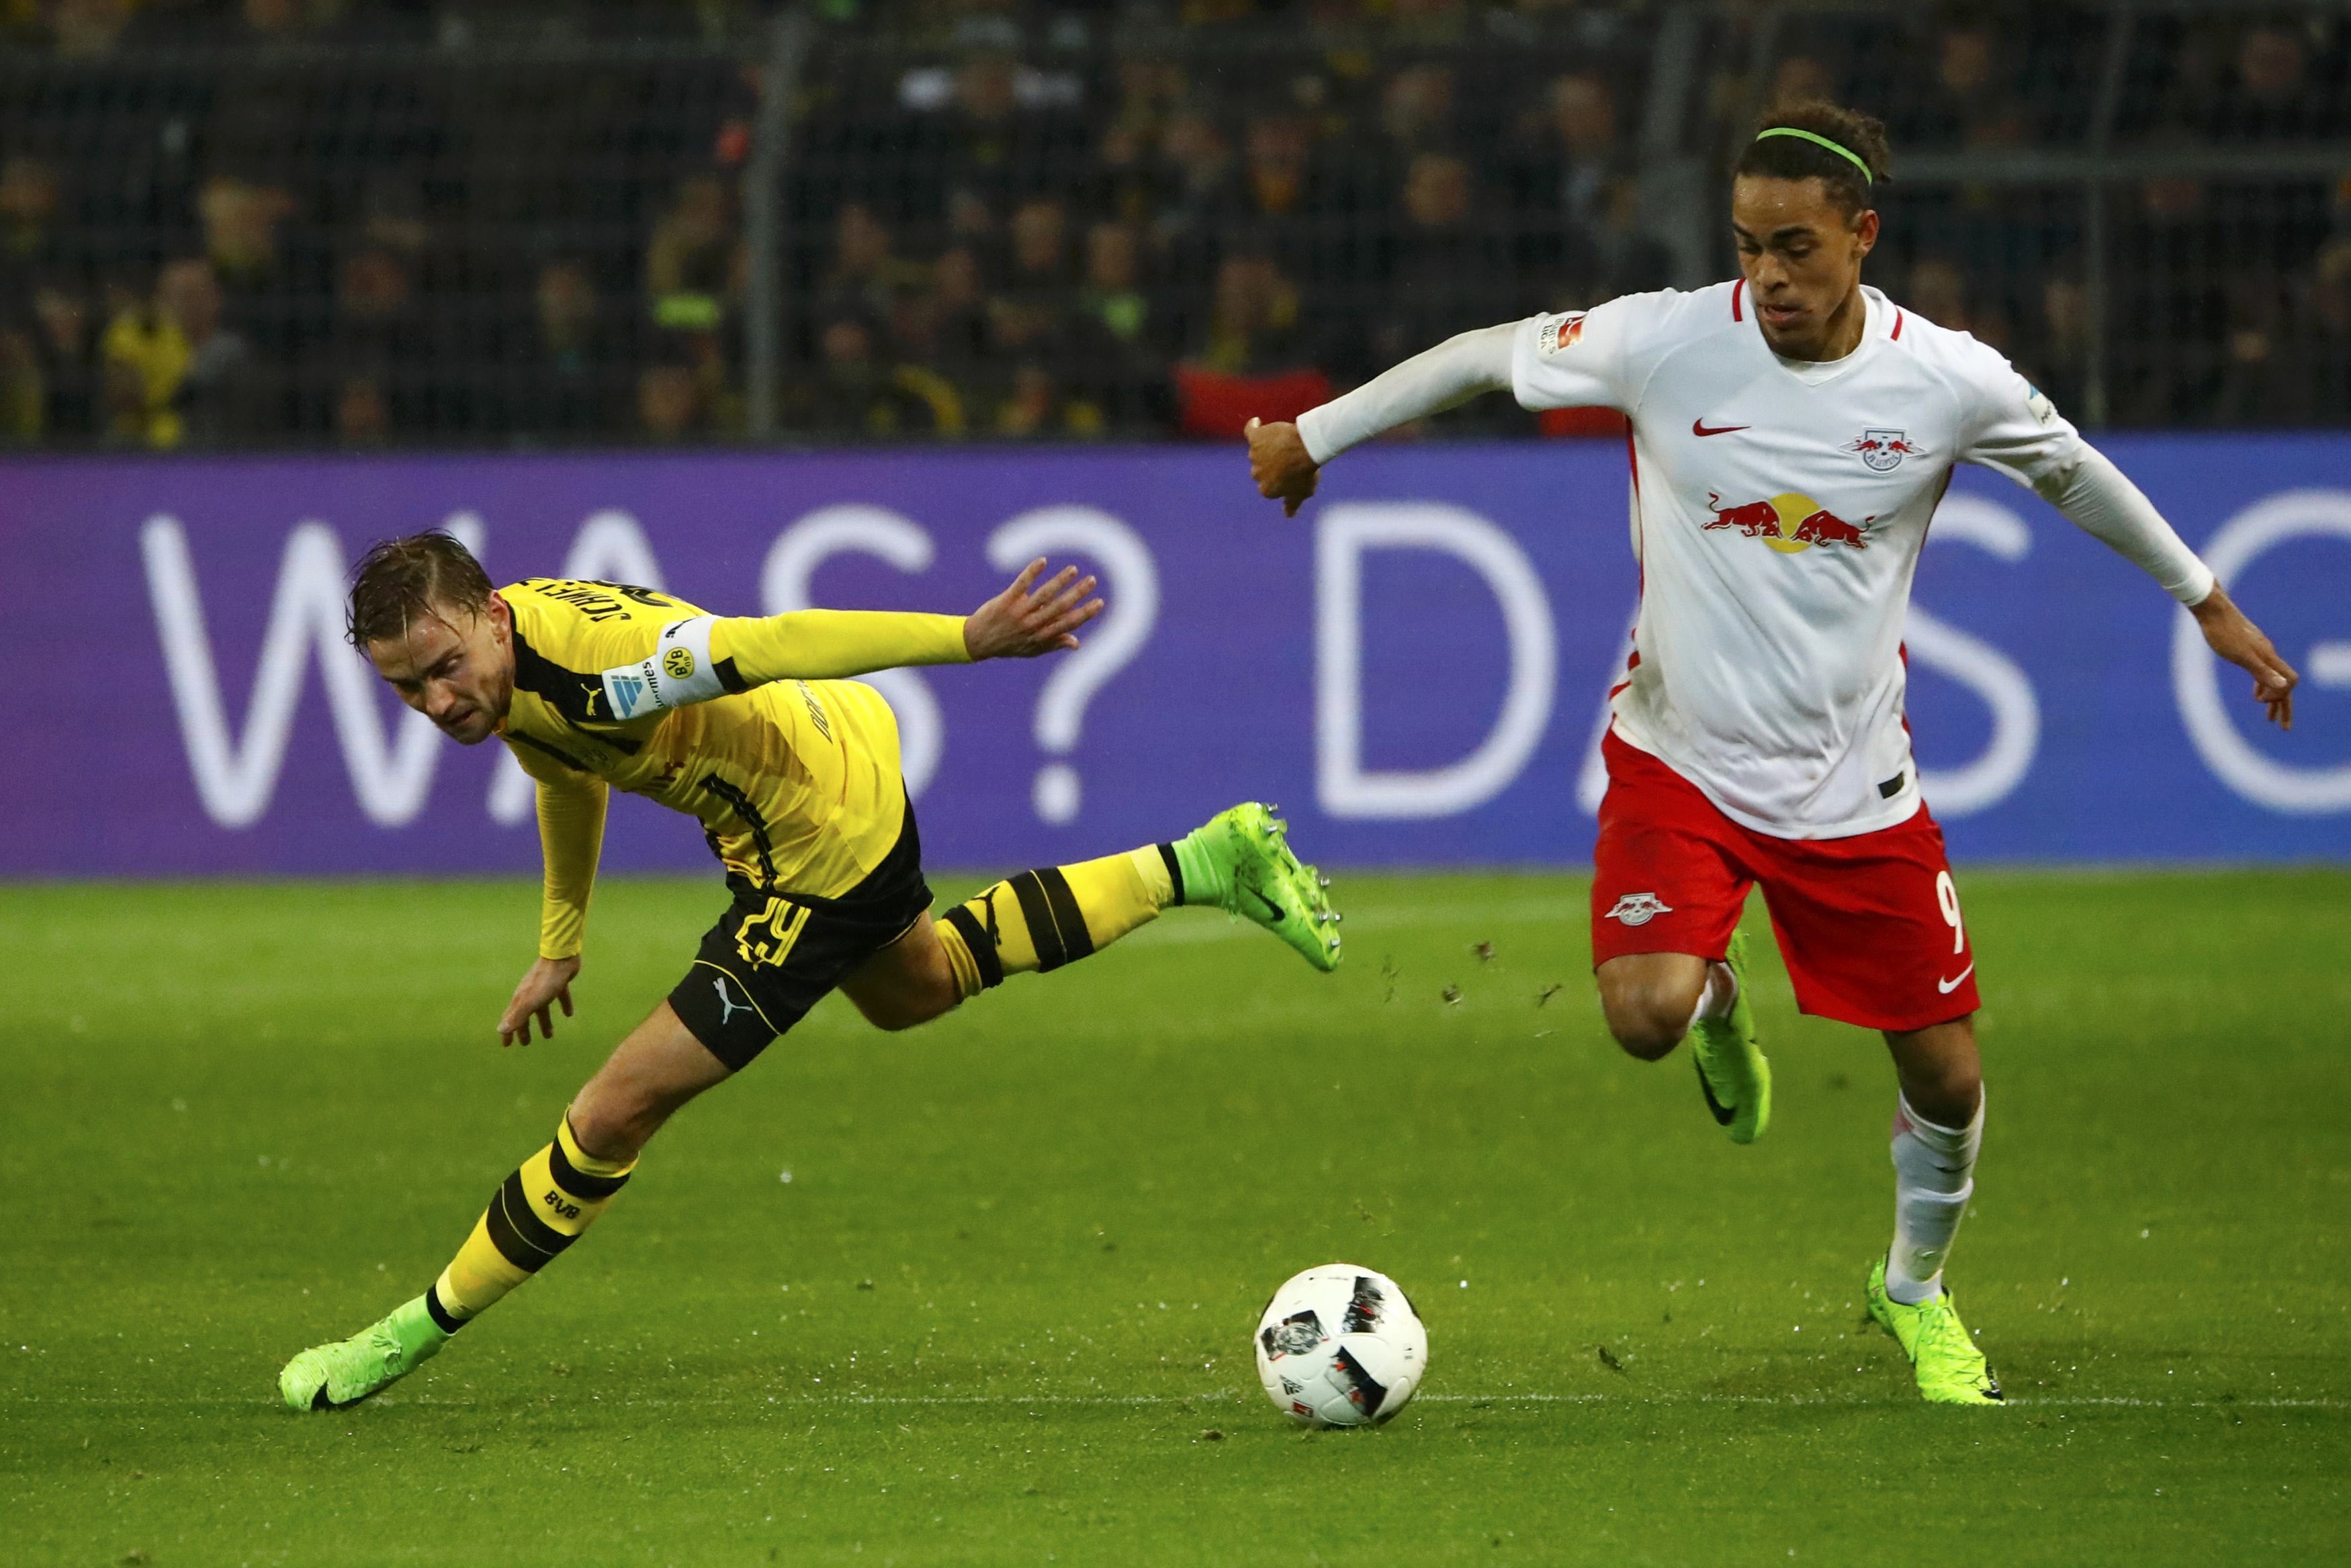 Football Soccer - Borussia Dortmund v RB Leipzig - German Bundesliga - Signal Iduna Park, Dortmund, Germany - 4/2/17 - Borussia Dortmund's Marcel Schmelzer in action with RB Leipzig's Yussuf Poulsen. REUTERS/Wolfgang Rattay DFL RULES TO LIMIT THE ONLINE USAGE DURING MATCH TIME TO 15 PICTURES PER GAME. IMAGE SEQUENCES TO SIMULATE VIDEO IS NOT ALLOWED AT ANY TIME. FOR FURTHER QUERIES PLEASE CONTACT DFL DIRECTLY AT + 49 69 650050.